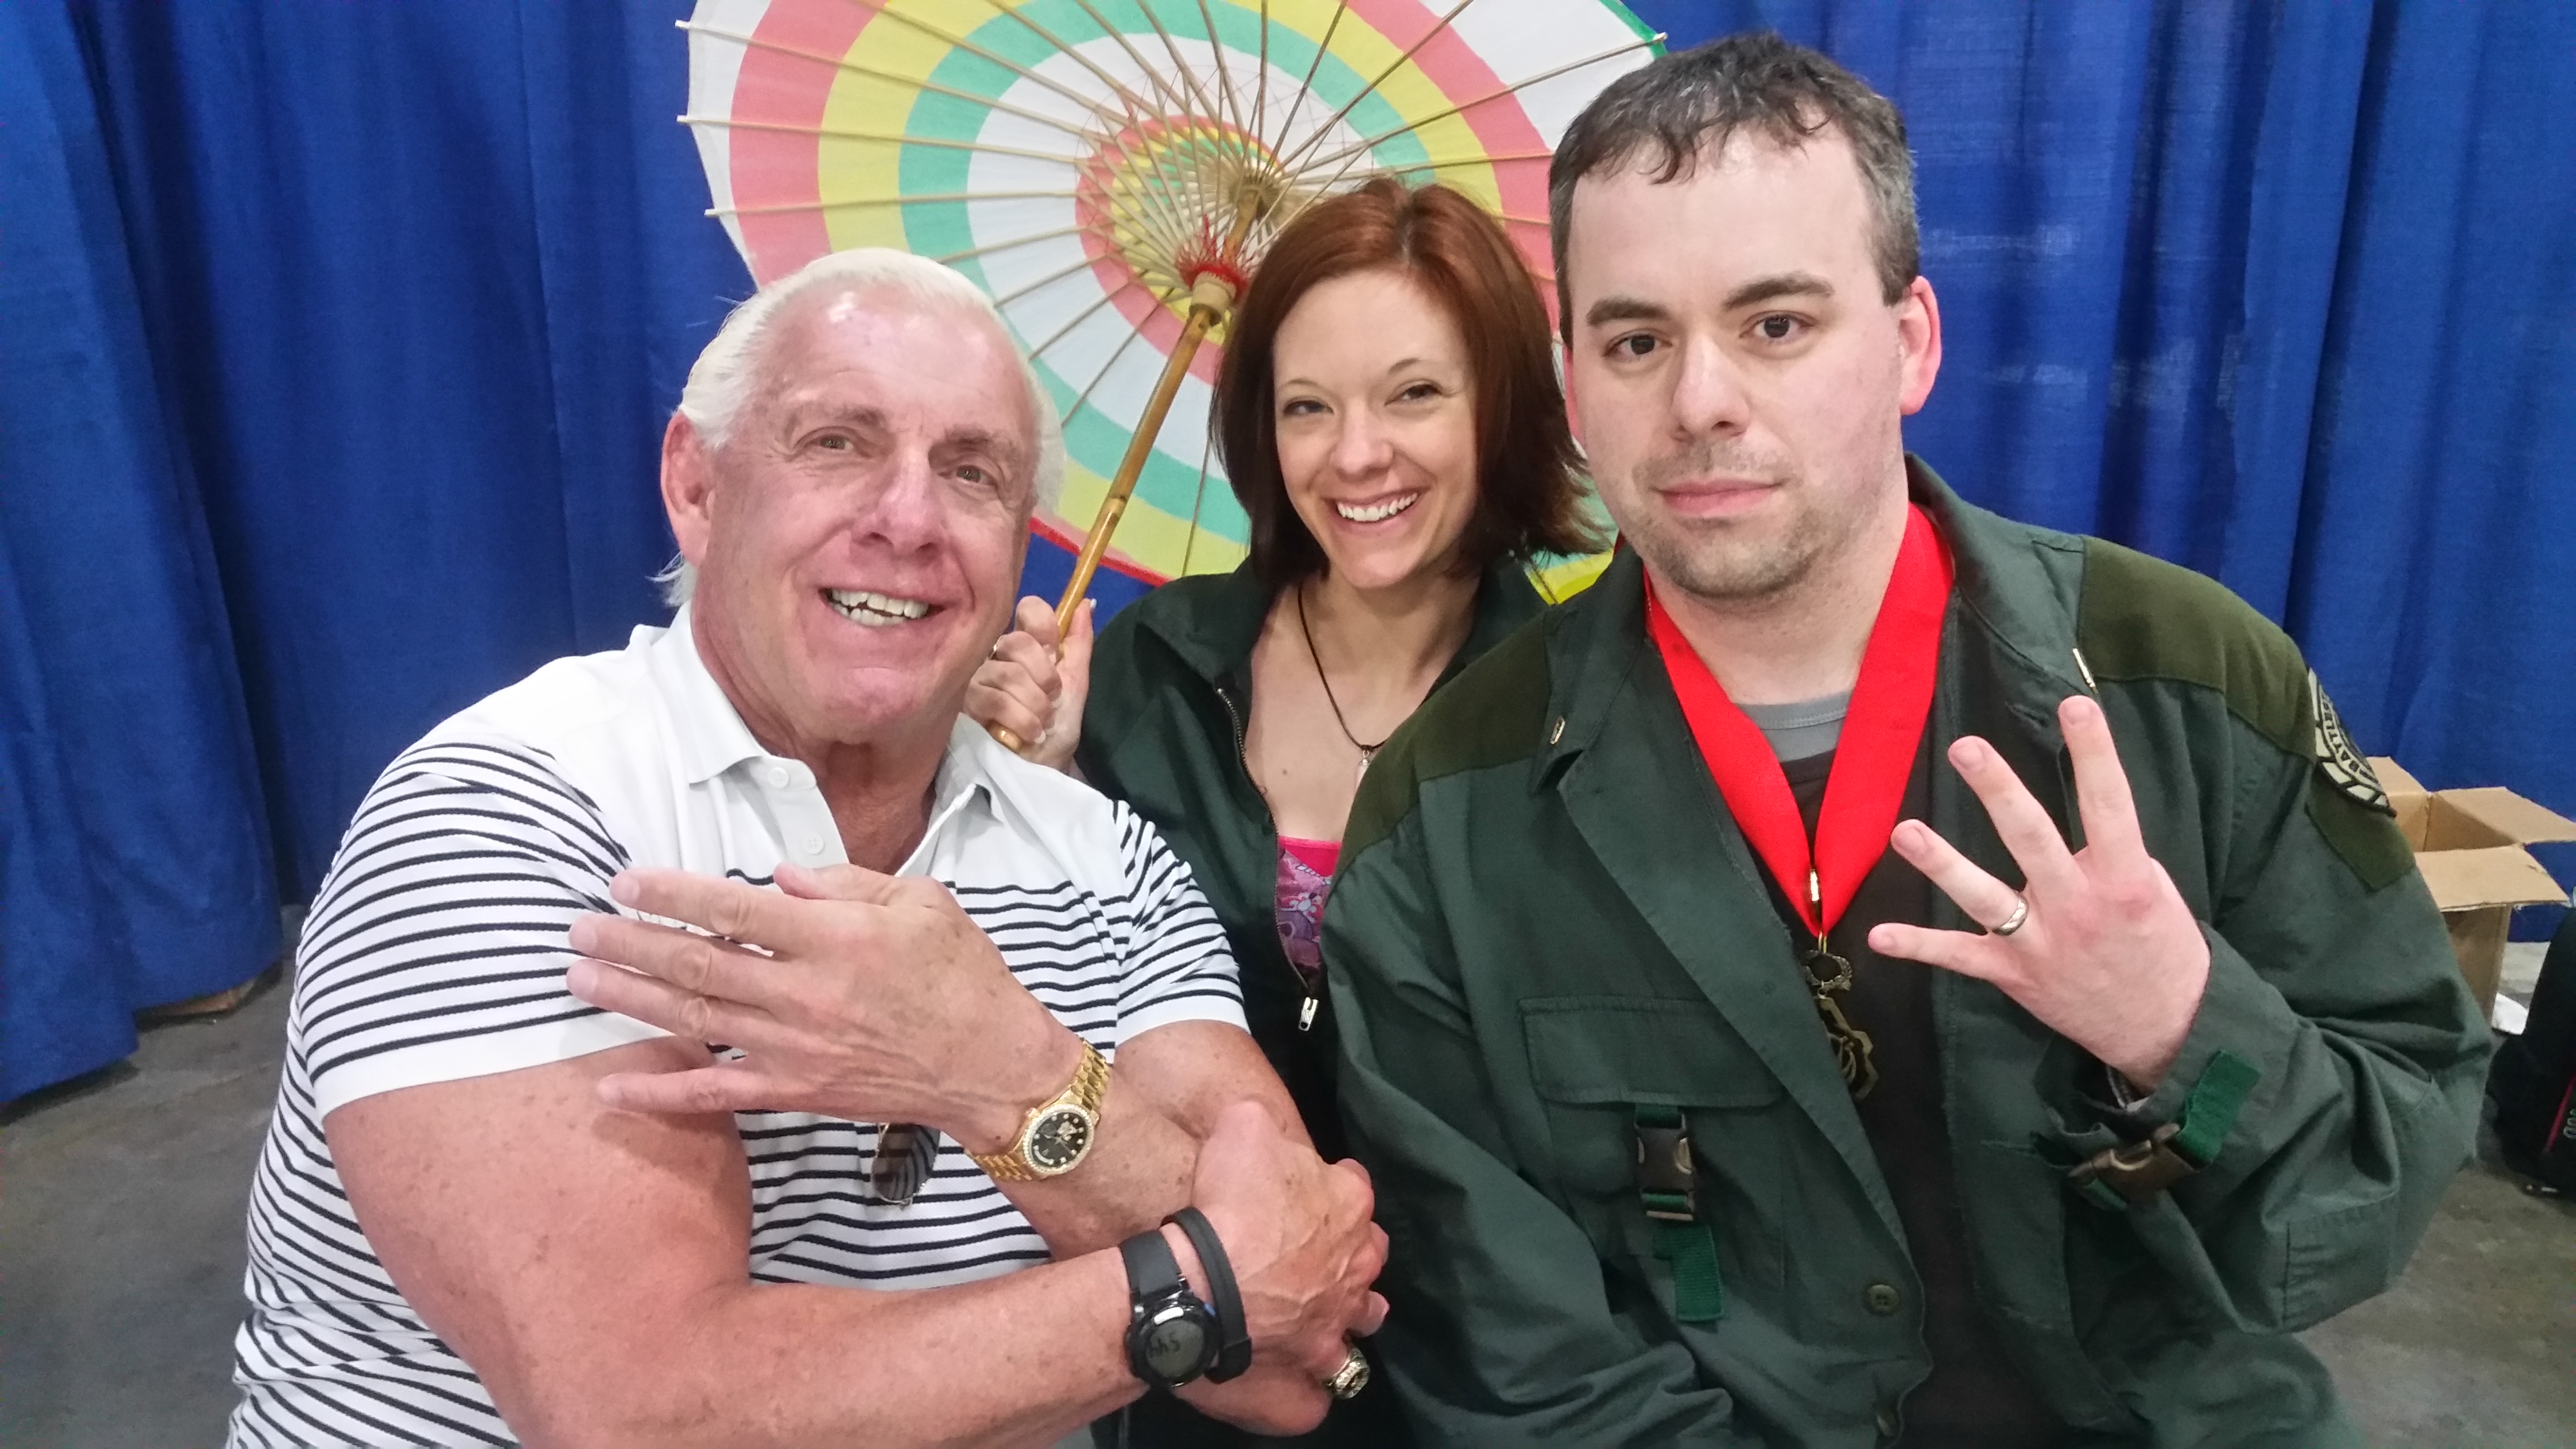 At a convention with my wife Stephanie Kelly and Ric Flair